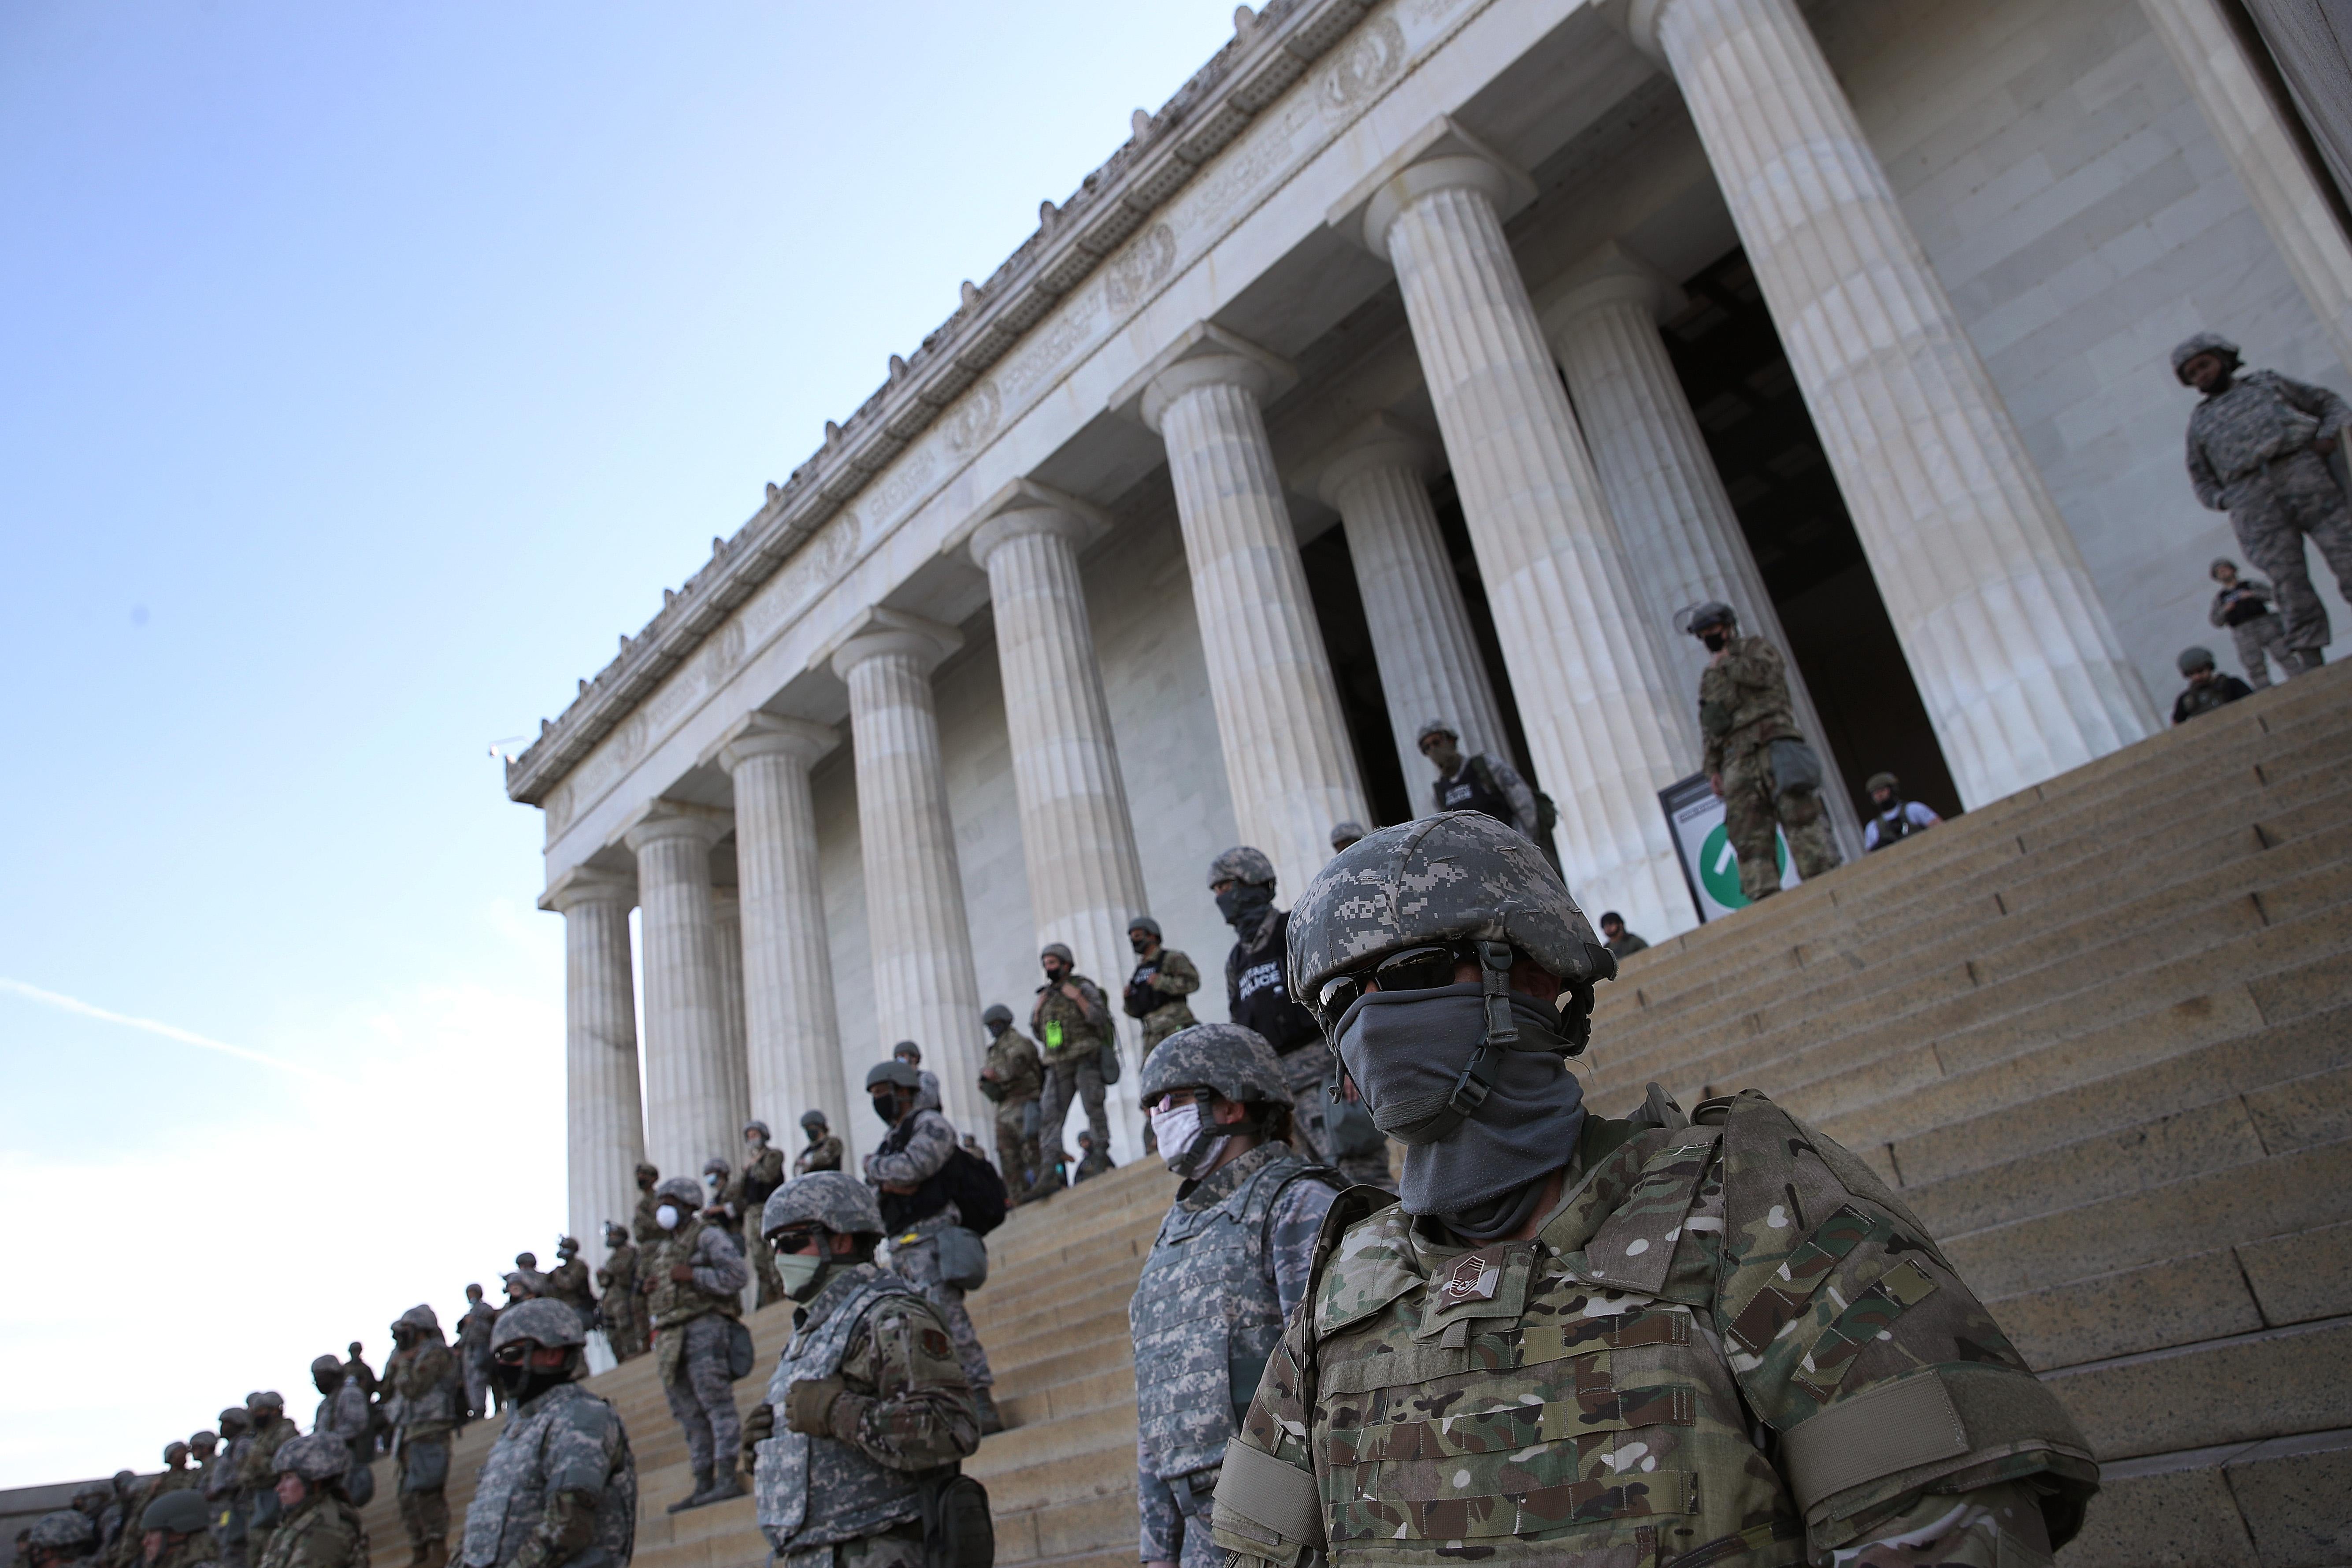 National Guard troops in dark sunglasses on the steps of the Lincoln memorial.